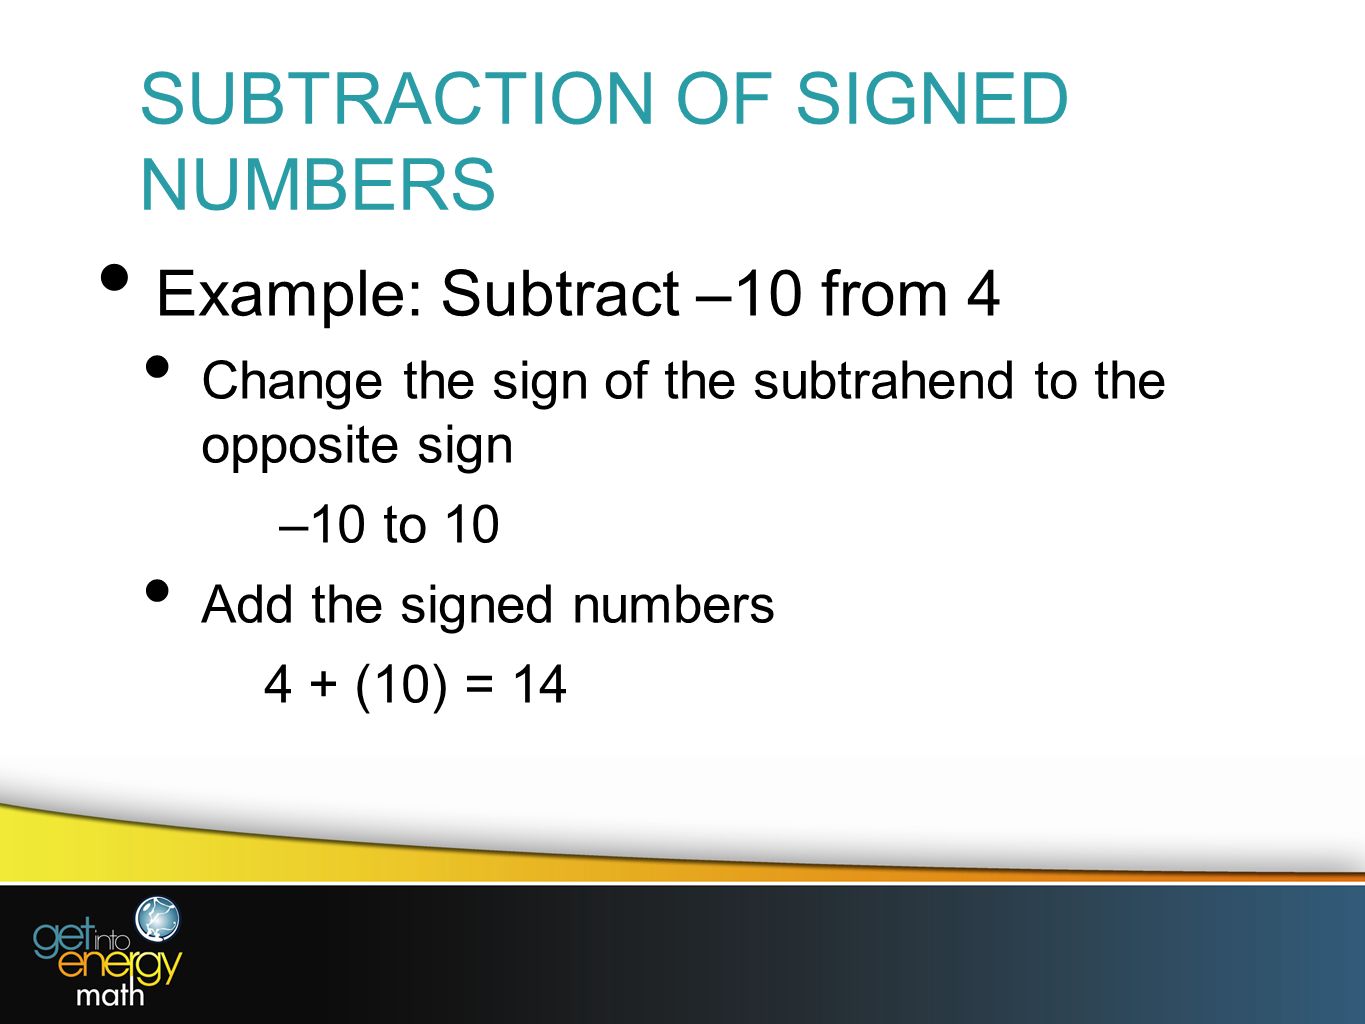 SUBTRACTION OF SIGNED NUMBERS